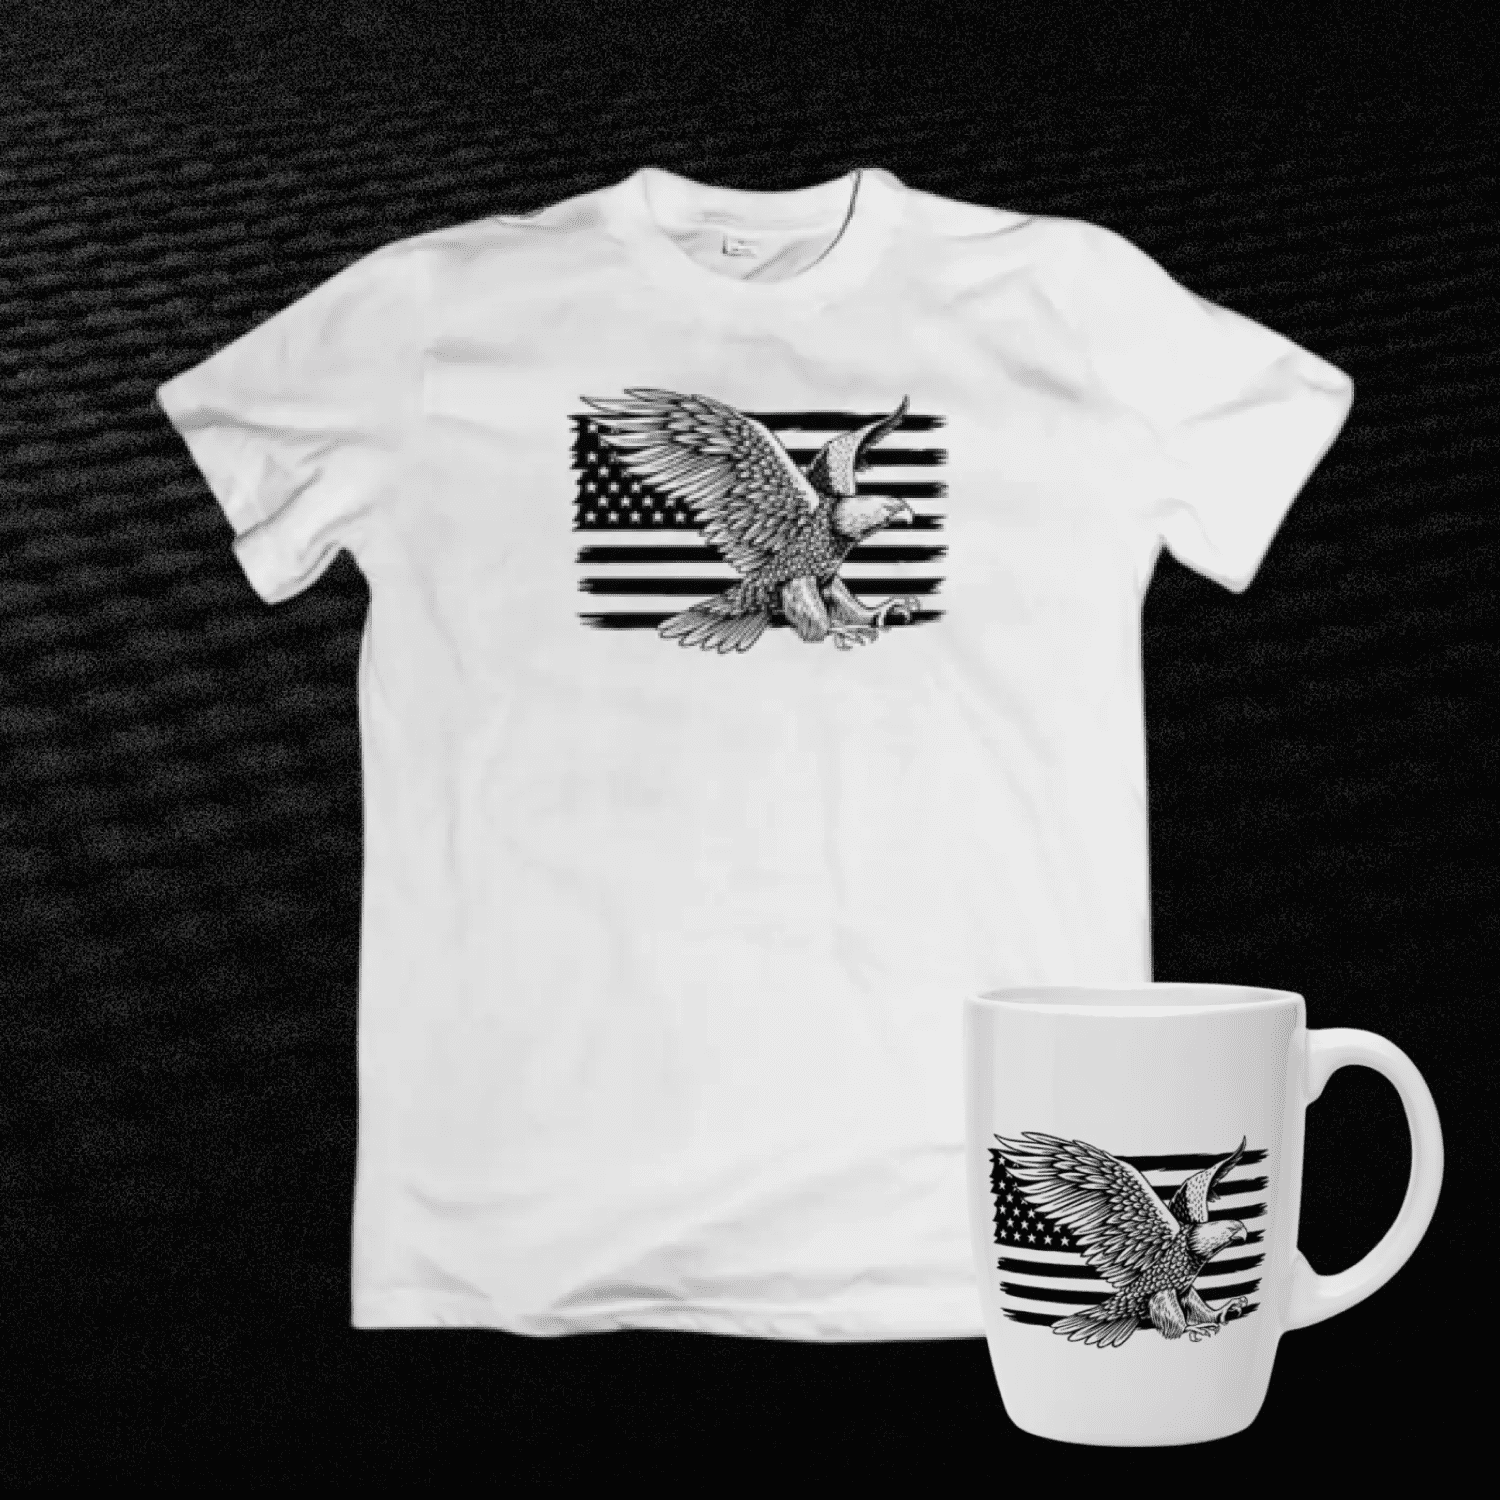 White t - shirt with an american flag and an eagle on it.